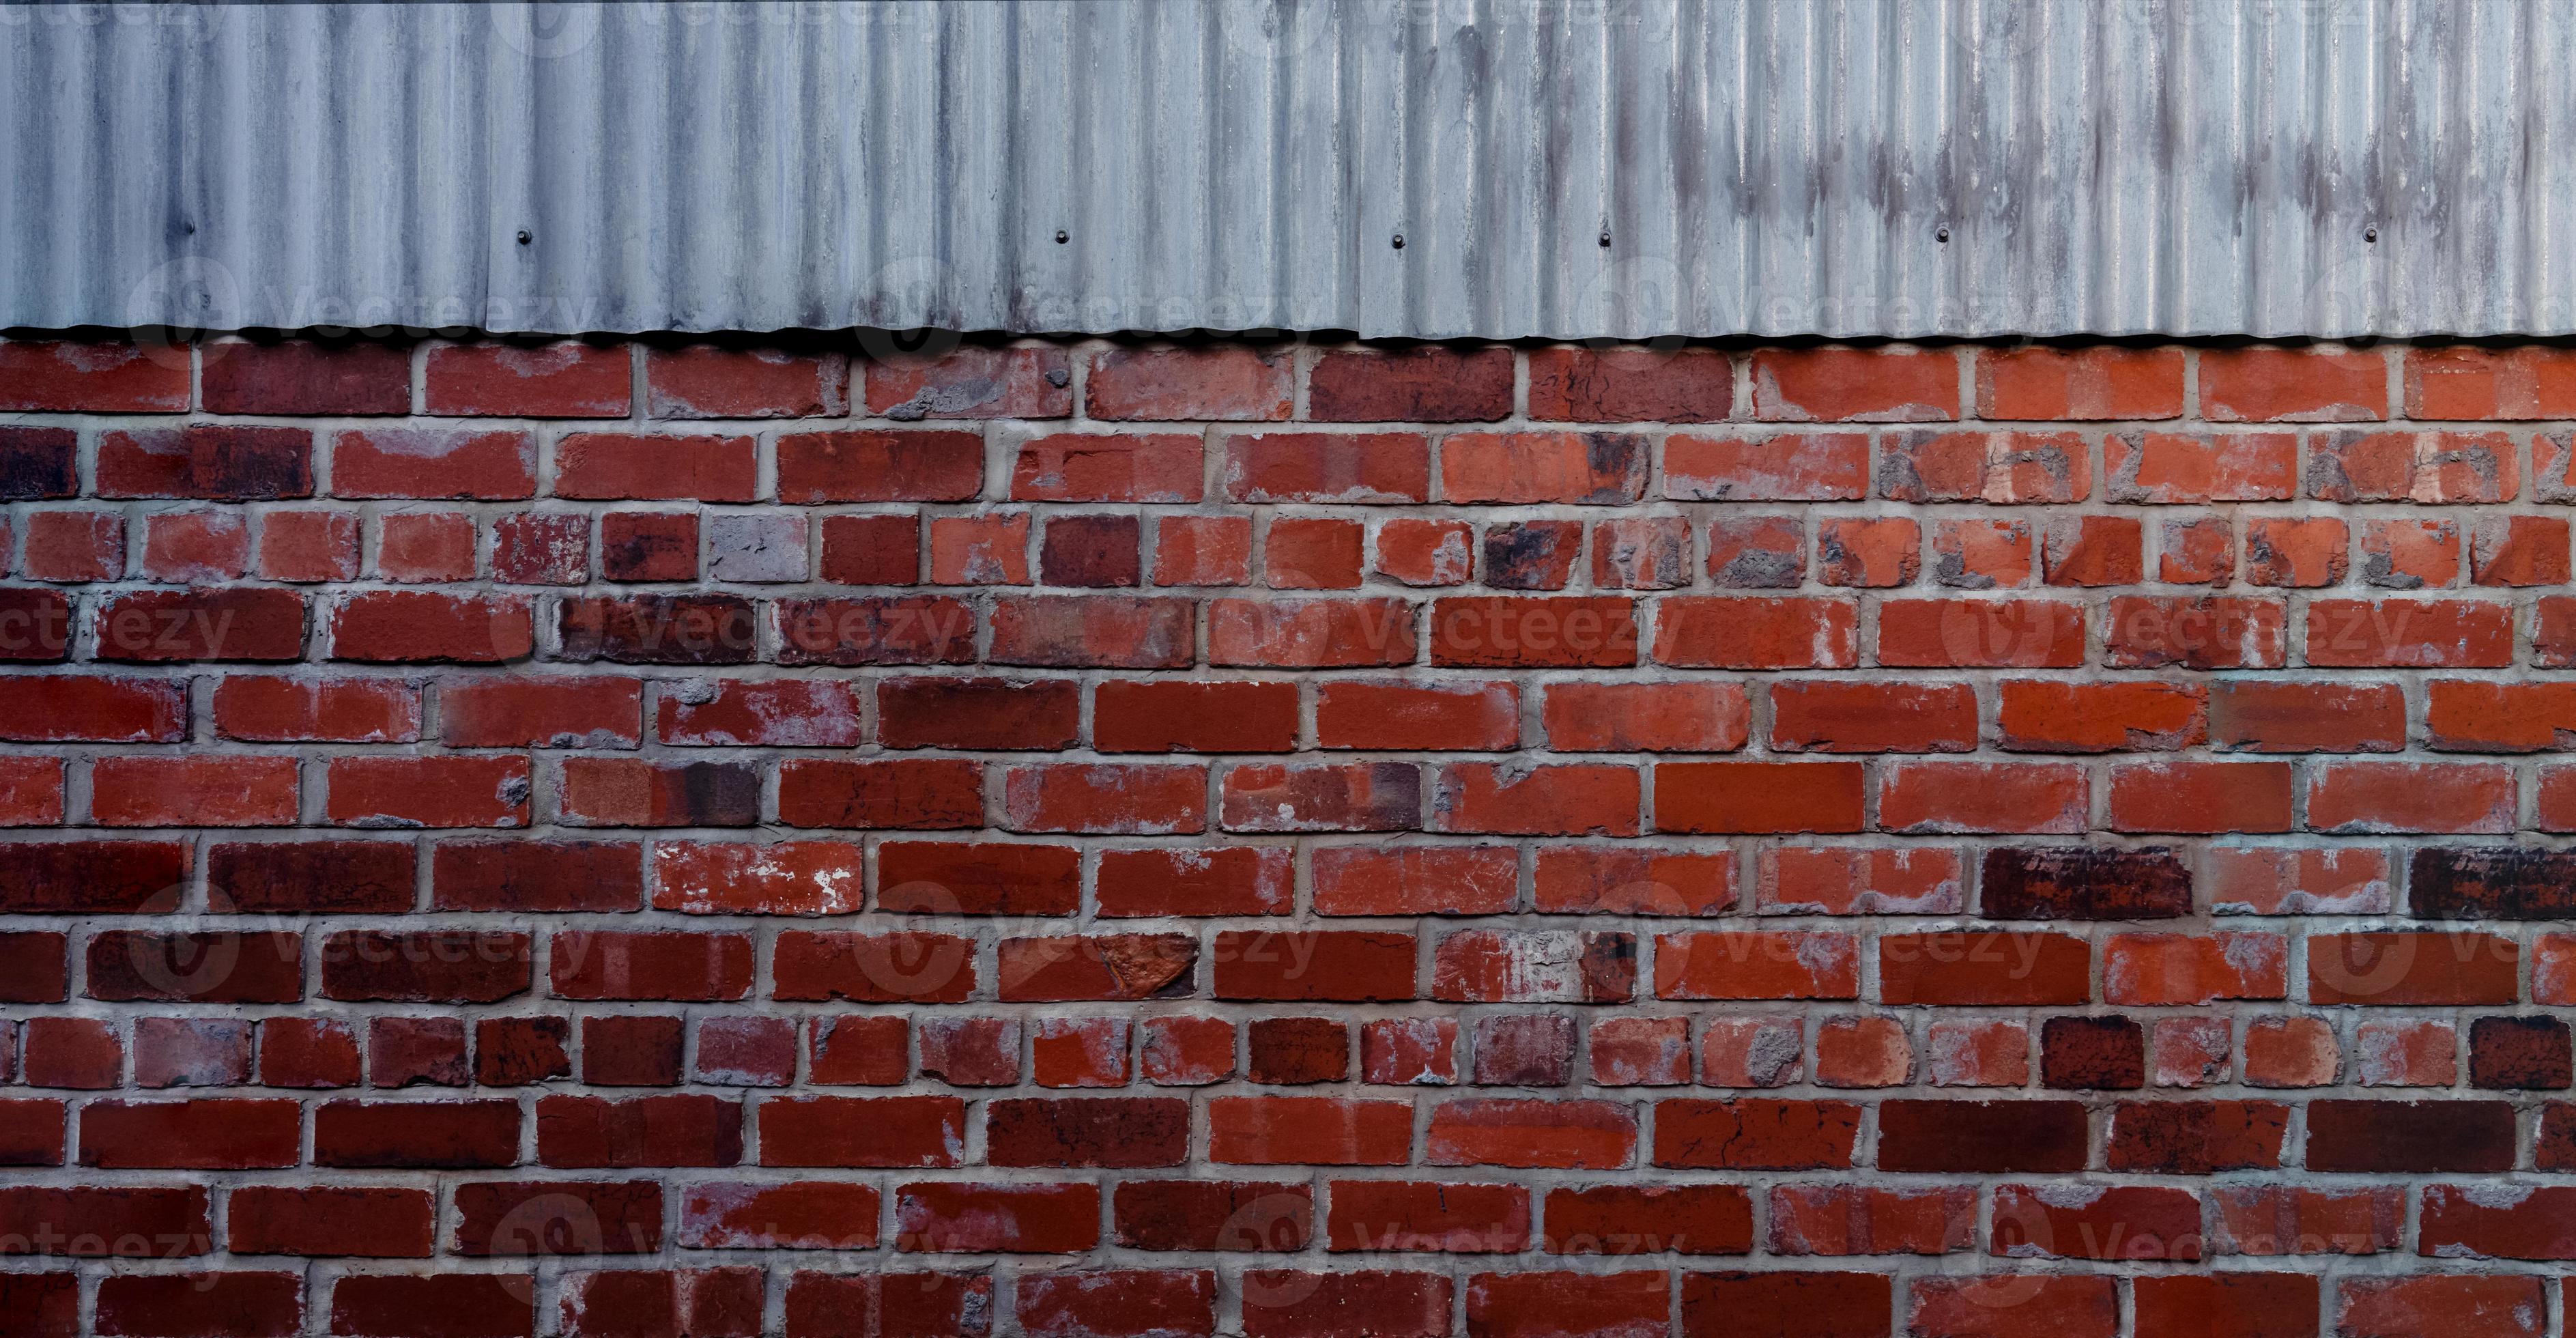 old red brick wall free background texture with grunge bottom half